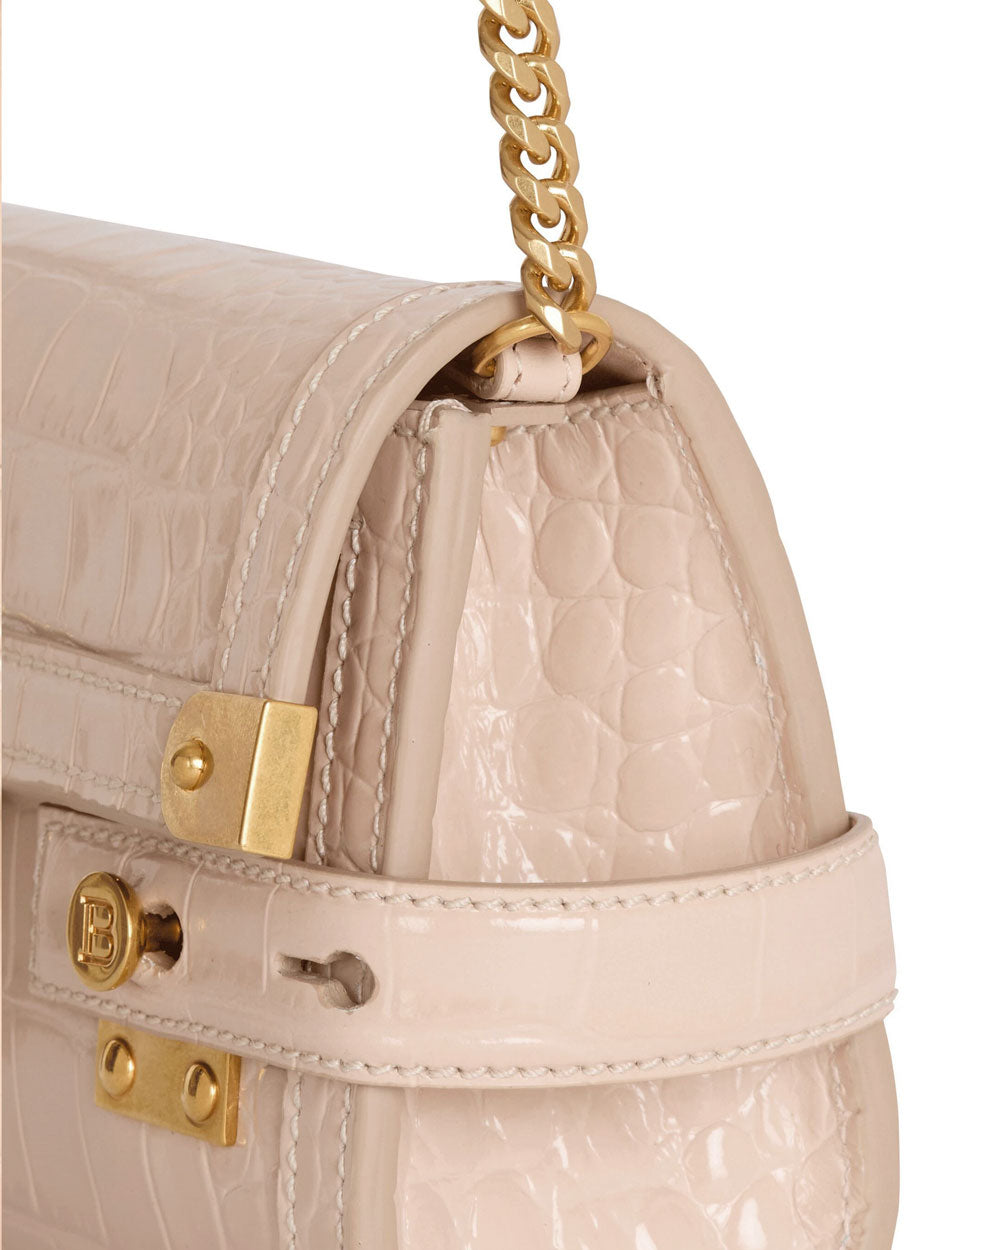 B-Buzz Pouch 23 Leather Clutch Bag in Nude